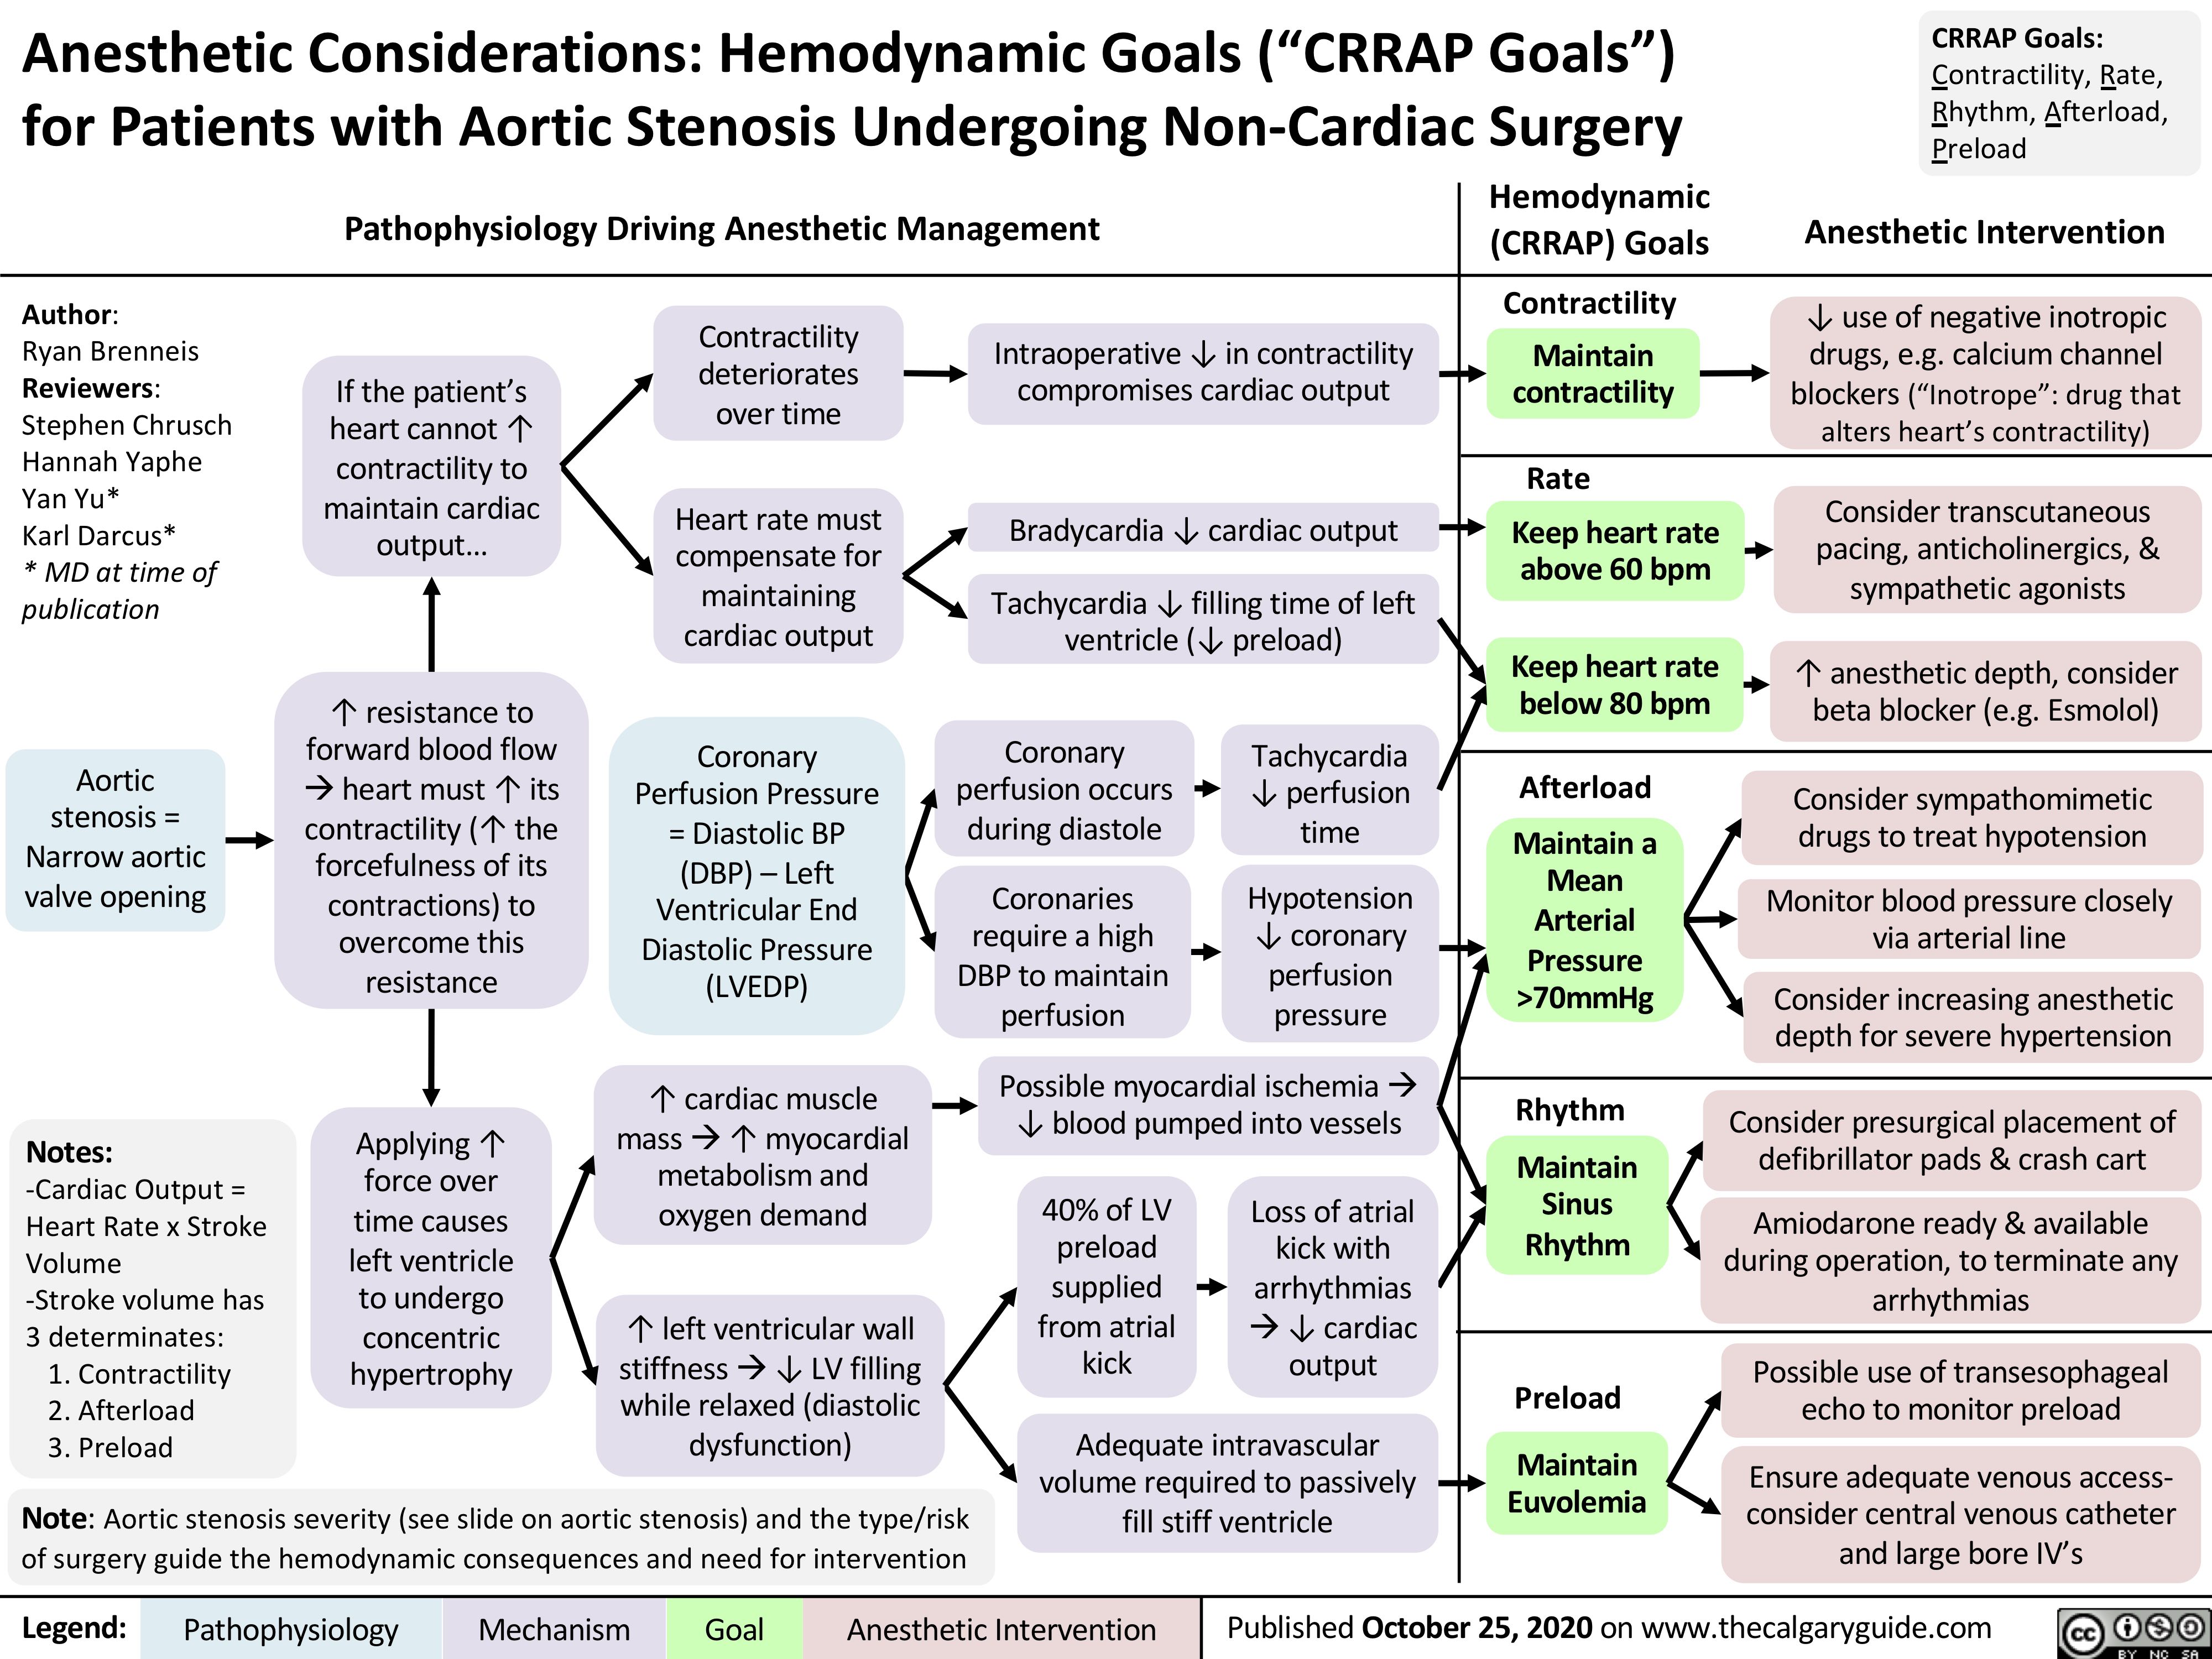  Anesthetic Considerations: Hemodynamic Goals (“CRRAP Goals”) for Patients with Aortic Stenosis Undergoing Non-Cardiac Surgery
CRRAP Goals:
Contractility, Rate, Rhythm, Afterload, Preload
     Pathophysiology Driving Anesthetic Management Hemodynamic Anesthetic Intervention (CRRAP) Goals
 Author:
Ryan Brenneis Reviewers: Stephen Chrusch Hannah Yaphe Yan Yu*
Karl Darcus*
* MD at time of publication
Aortic stenosis = Narrow aortic valve opening
Notes:
-Cardiac Output = Heart Rate x Stroke Volume
-Stroke volume has 3 determinates:
1. Contractility 2. Afterload
3. Preload
If the patient’s heart cannot ↑ contractility to maintain cardiac output...
↑ resistance to forward blood flow àheart must ↑ its contractility (↑ the forcefulness of its contractions) to overcome this resistance
Applying ↑ force over time causes left ventricle to undergo concentric hypertrophy
Contractility deteriorates over time
Heart rate must compensate for maintaining cardiac output
Coronary Perfusion Pressure = Diastolic BP (DBP) – Left Ventricular End Diastolic Pressure (LVEDP)
↑ cardiac muscle massà↑ myocardial metabolism and oxygen demand
↑ left ventricular wall stiffnessà↓ LV filling while relaxed (diastolic dysfunction)
Intraoperative ↓ in contractility compromises cardiac output
Bradycardia ↓ cardiac output
Tachycardia ↓ filling time of left ventricle (↓ preload)
                Coronary perfusion occurs during diastole
Coronaries require a high DBP to maintain perfusion
Tachycardia ↓ perfusion time
Hypotension ↓ coronary perfusion pressure
          Possible myocardial ischemiaà ↓ blood pumped into vessels
       40% of LV preload supplied from atrial kick
Loss of atrial kick with arrhythmias à↓ cardiac output
       Note: Aortic stenosis severity (see slide on aortic stenosis) and the type/risk of surgery guide the hemodynamic consequences and need for intervention
Adequate intravascular volume required to passively fill stiff ventricle
Contractility
↓ use of negative inotropic Maintain drugs, e.g. calcium channel
contractility blockers (“Inotrope”: drug that alters heart’s contractility)
    Rate
Keep heart rate above 60 bpm
Keep heart rate below 80 bpm
Consider transcutaneous pacing, anticholinergics, & sympathetic agonists
↑ anesthetic depth, consider beta blocker (e.g. Esmolol)
       Afterload
Maintain a Mean Arterial Pressure >70mmHg
Consider sympathomimetic drugs to treat hypotension
Monitor blood pressure closely via arterial line
Consider increasing anesthetic depth for severe hypertension
       Rhythm
Maintain Sinus Rhythm
Consider presurgical placement of defibrillator pads & crash cart
Amiodarone ready & available during operation, to terminate any arrhythmias
     Preload
Maintain Euvolemia
Possible use of transesophageal echo to monitor preload
Ensure adequate venous access- consider central venous catheter and large bore IV’s
   Legend:
 Pathophysiology
 Mechanism
 Goal
  Anesthetic Intervention
Published October 25, 2020 on www.thecalgaryguide.com
            